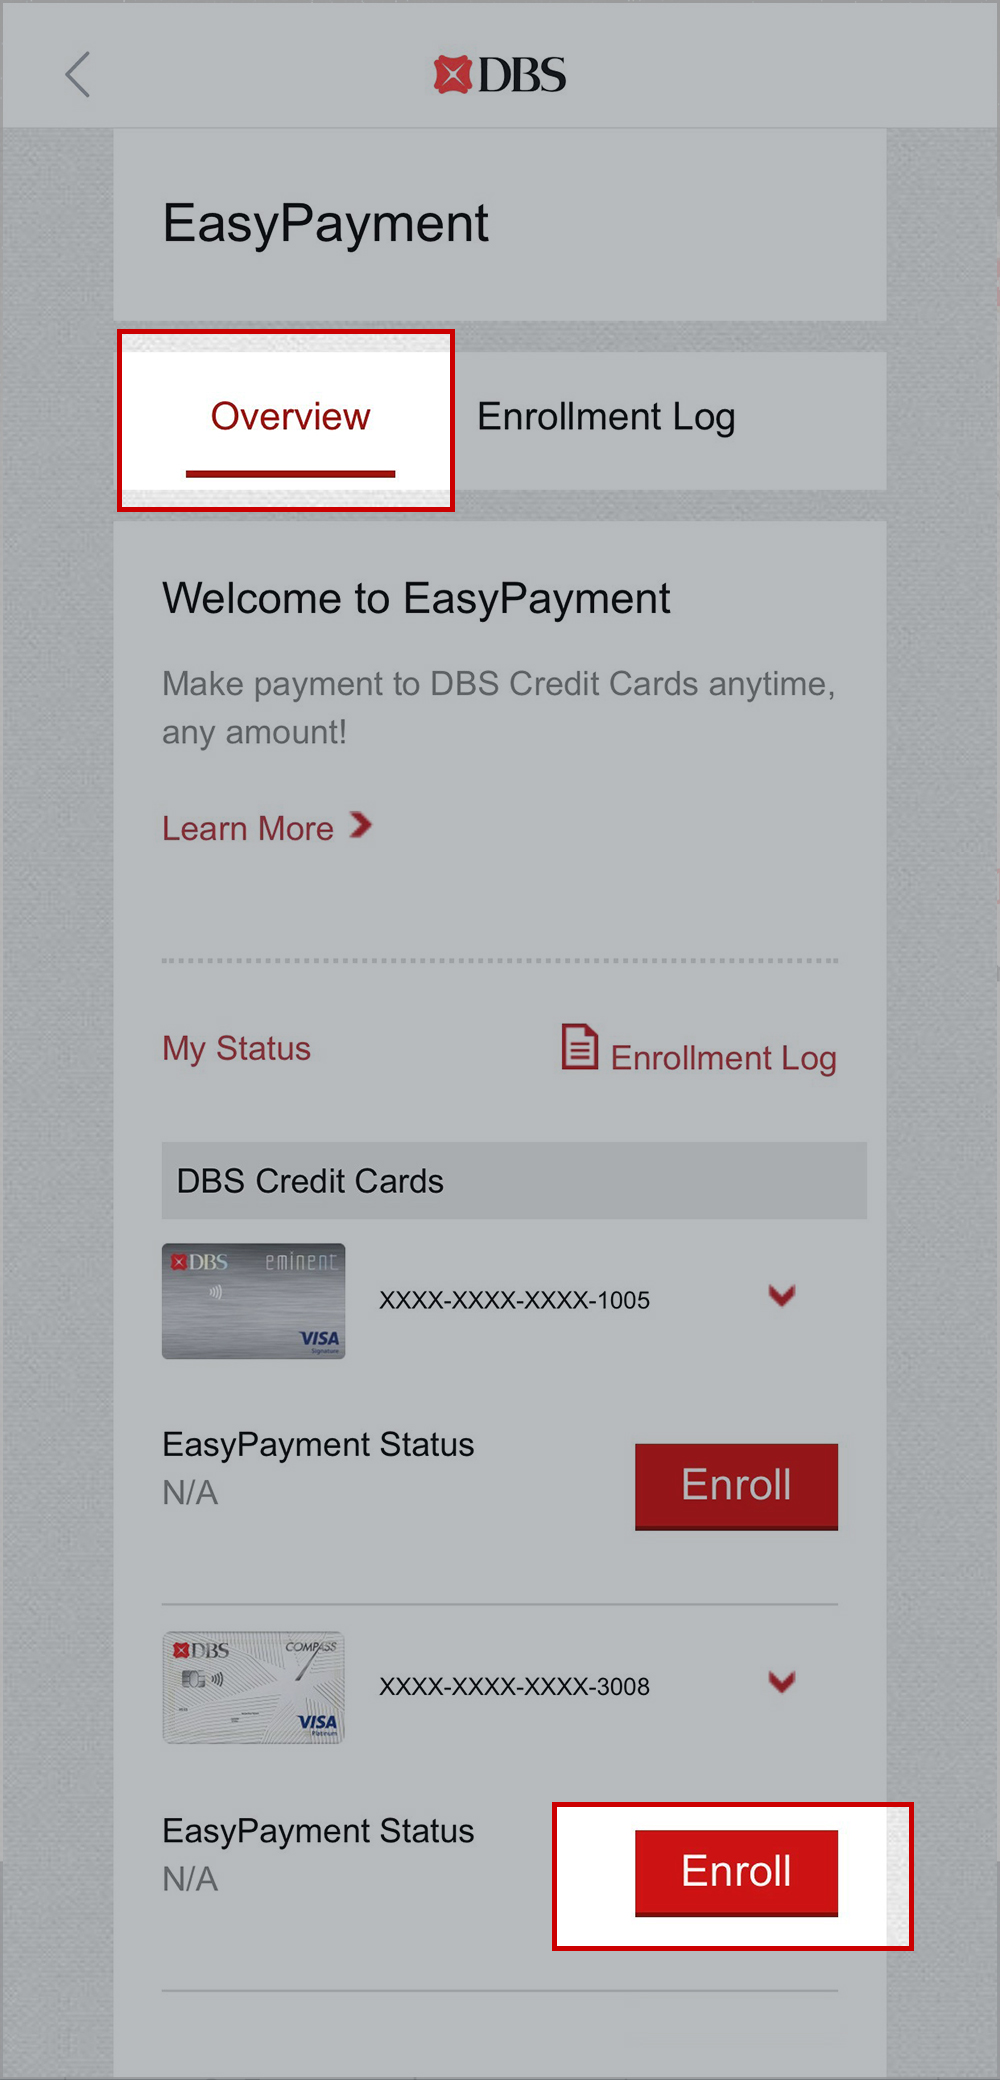 Tap on “Enroll” in Overview